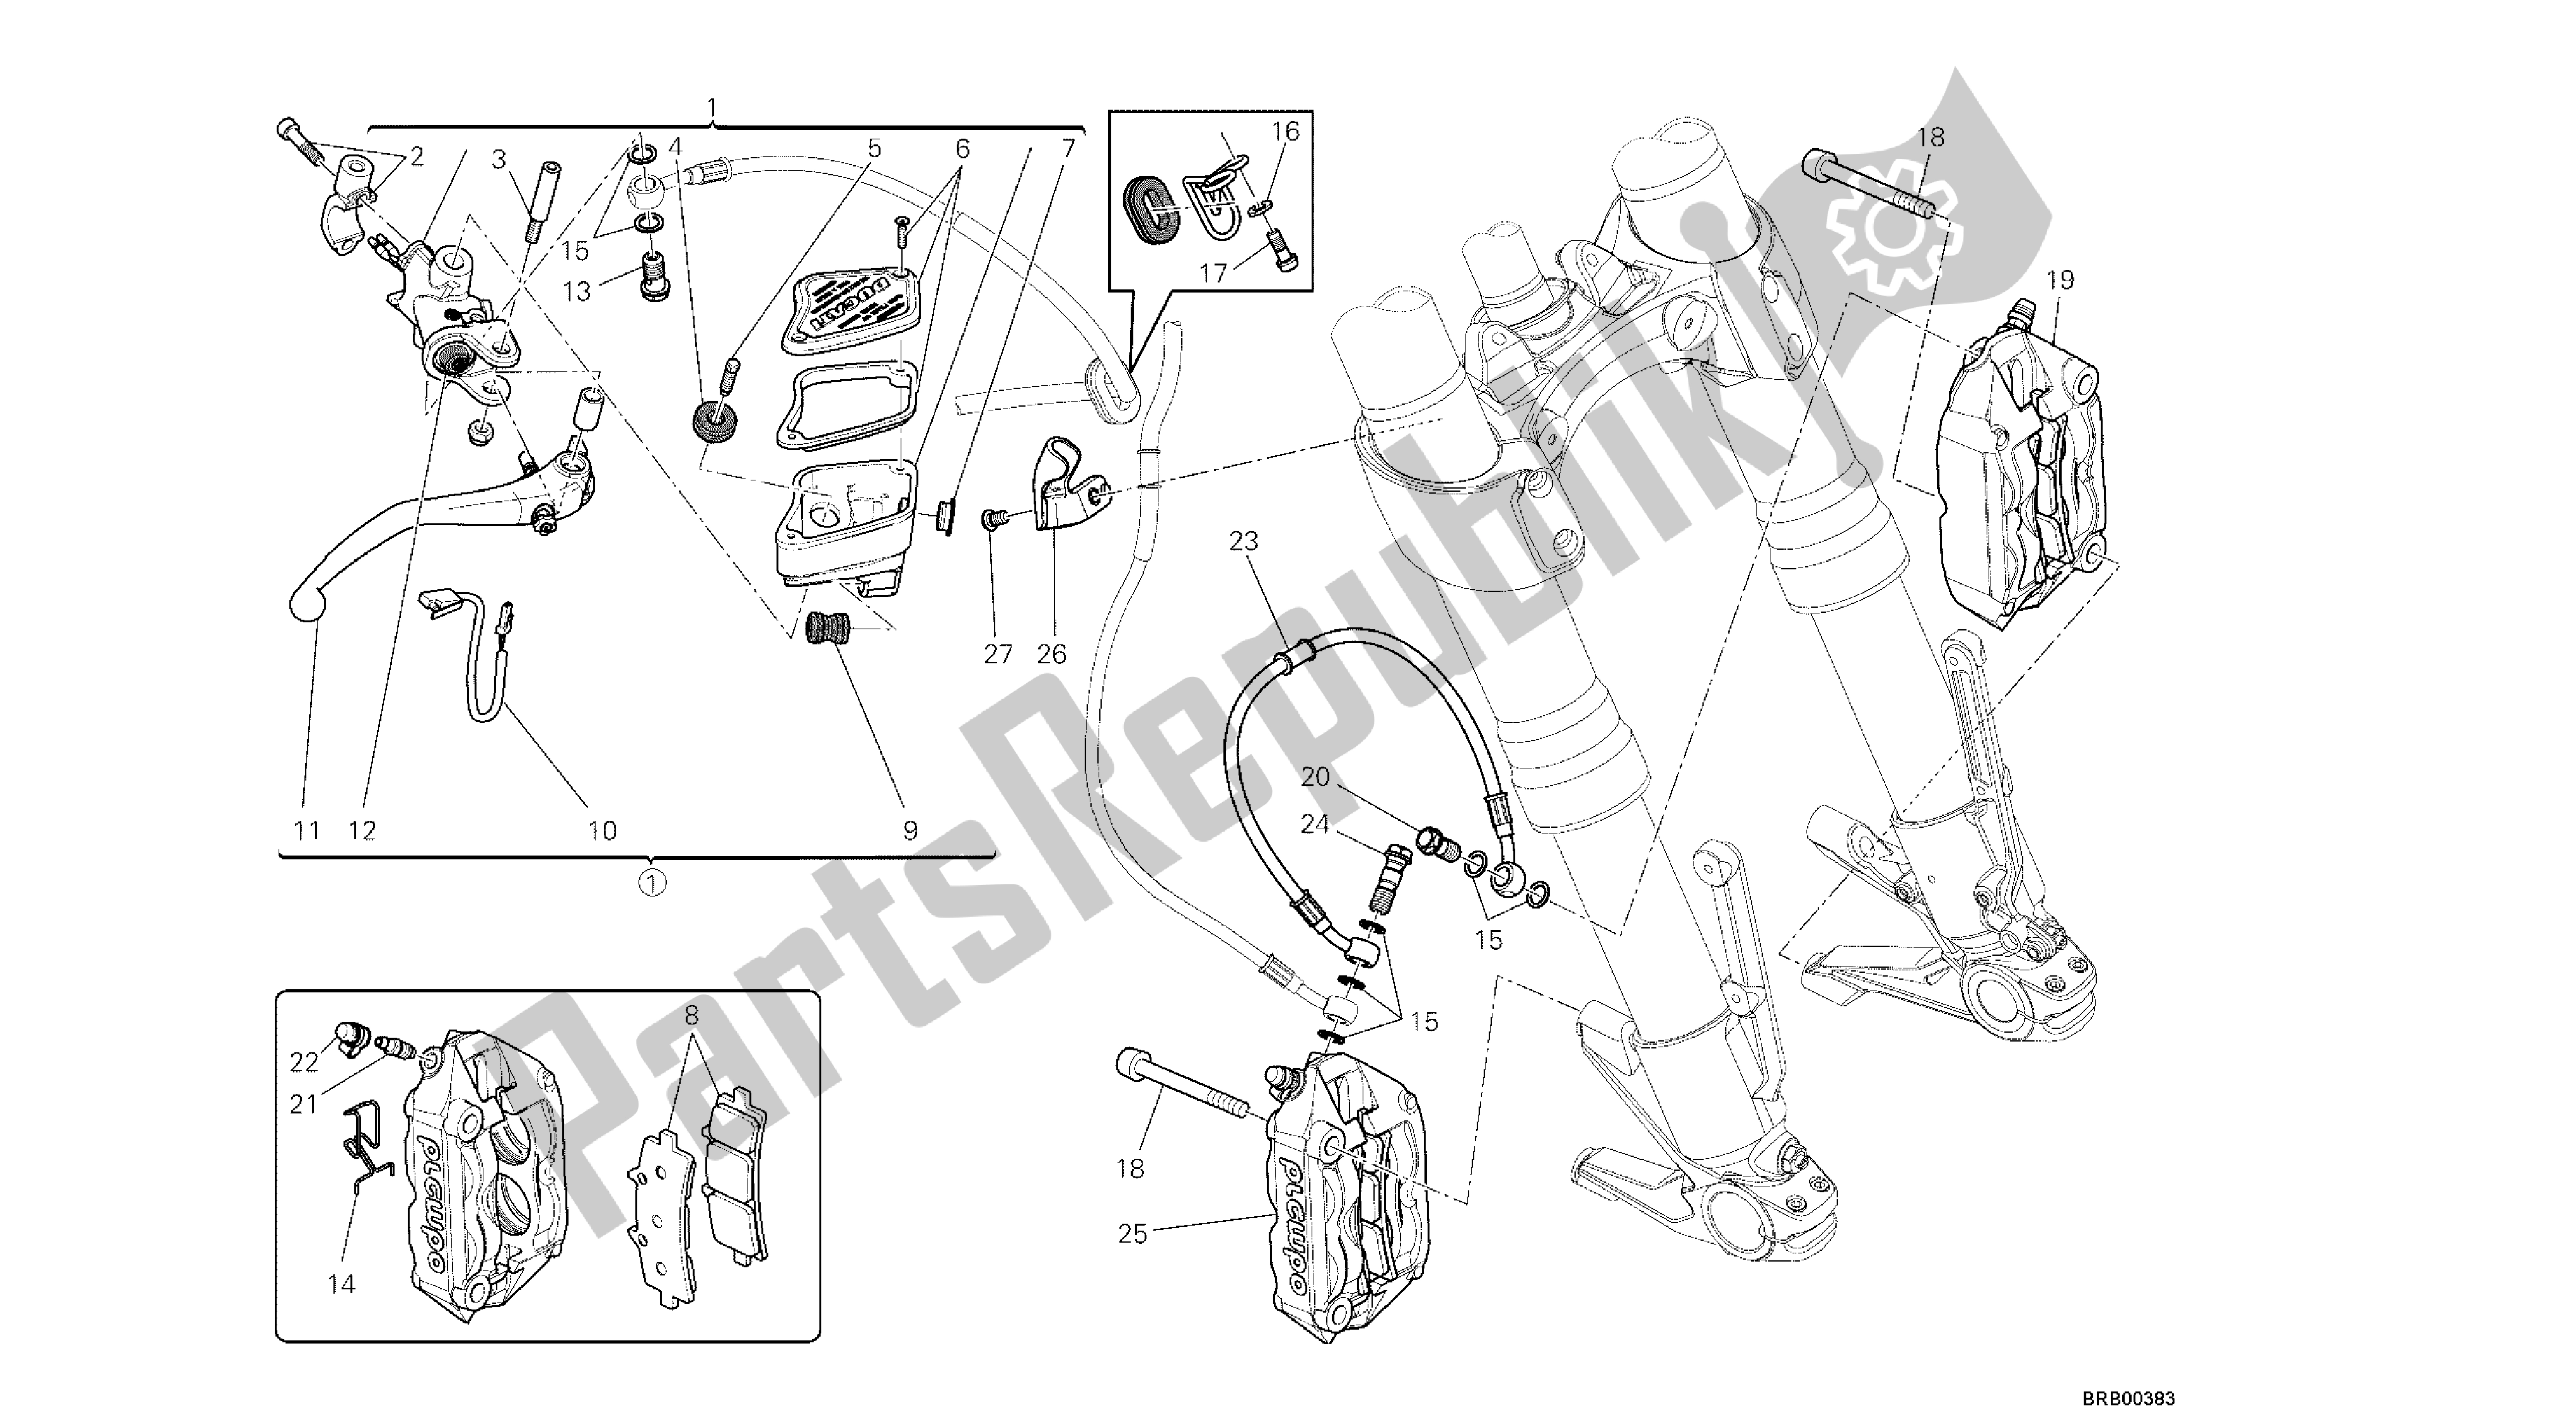 All parts for the Drawing 024 - Front Brake System [mod:dvl;xs T:a Us, Bra ,ch N,e Ur,f Ra, Jap ,th Ai] Group Fr Ame of the Ducati Diavel 1200 2013